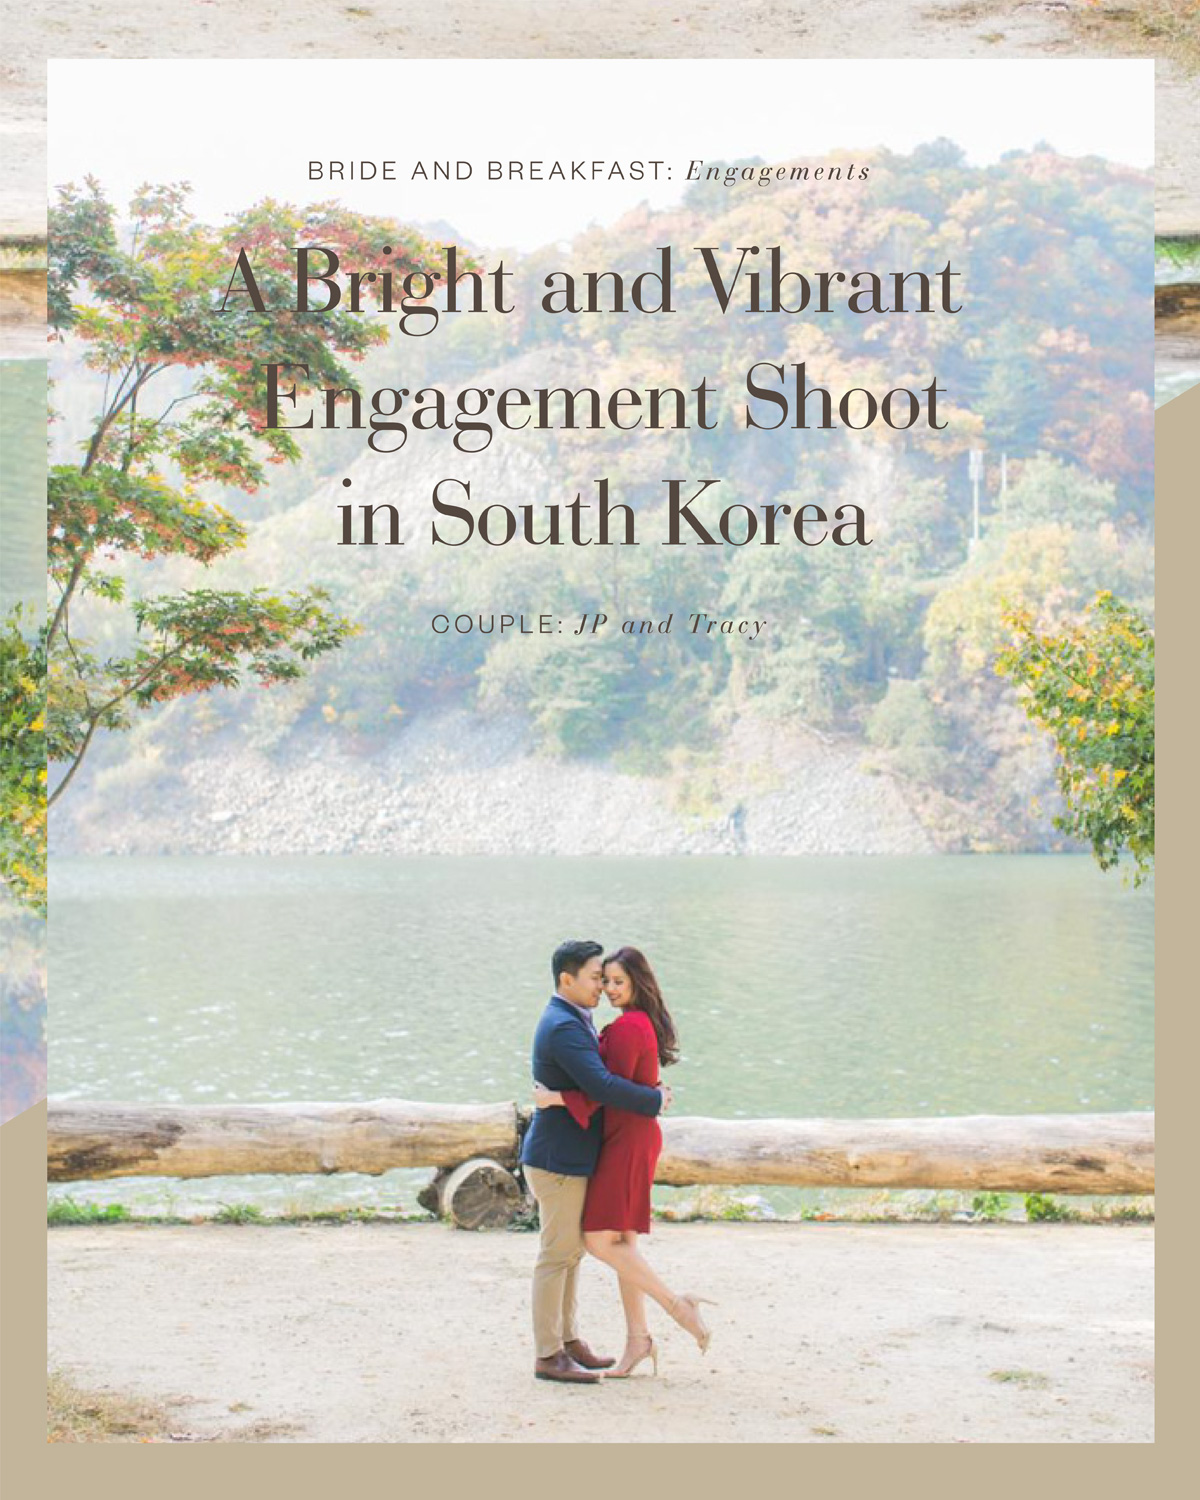 A Bright and Vibrant Engagement Shoot in South Korea